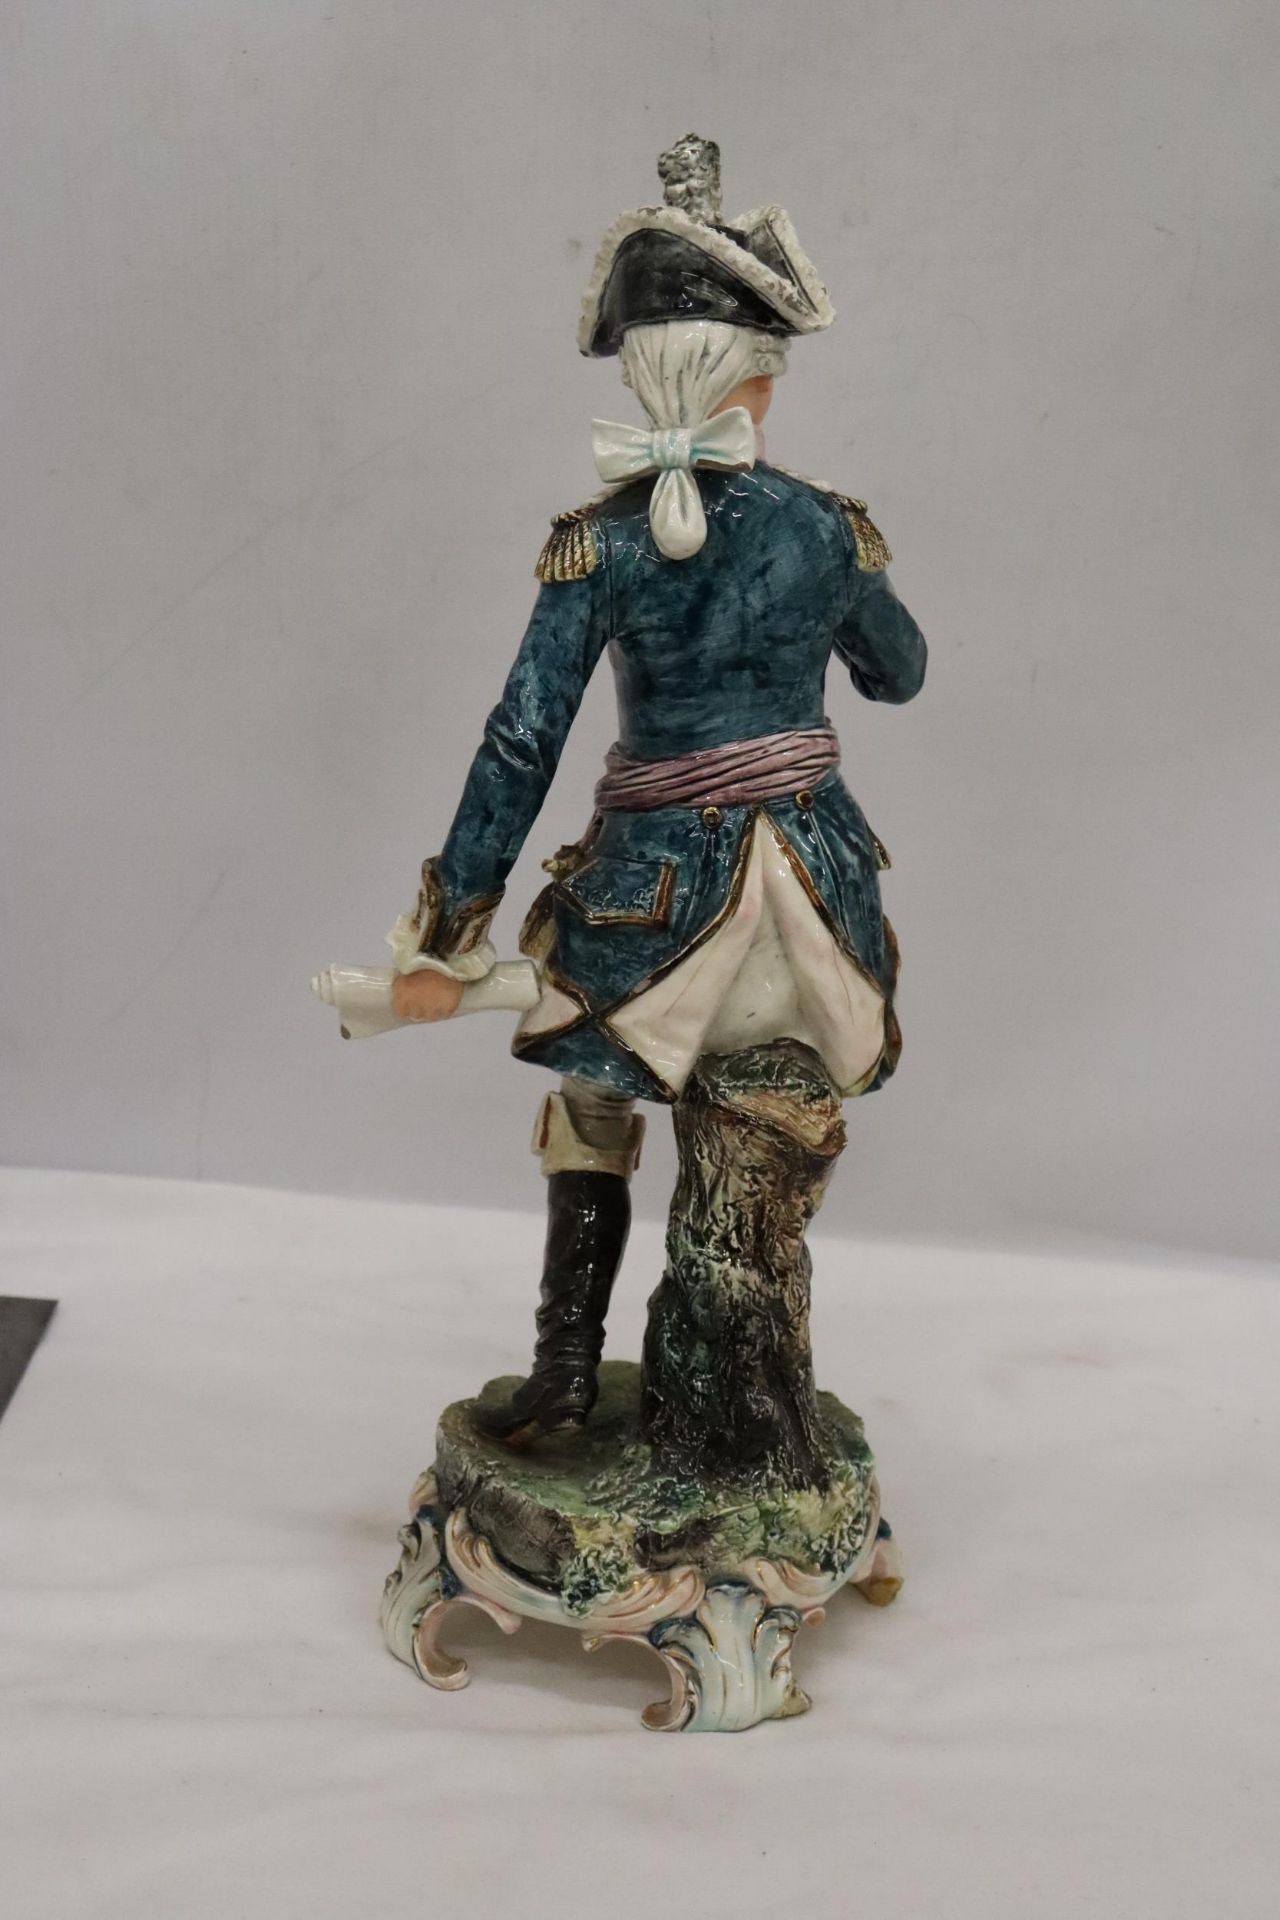 A ROYAL DUX BOHEMIA ADMIRAL NELSON FIGURE - Image 3 of 6